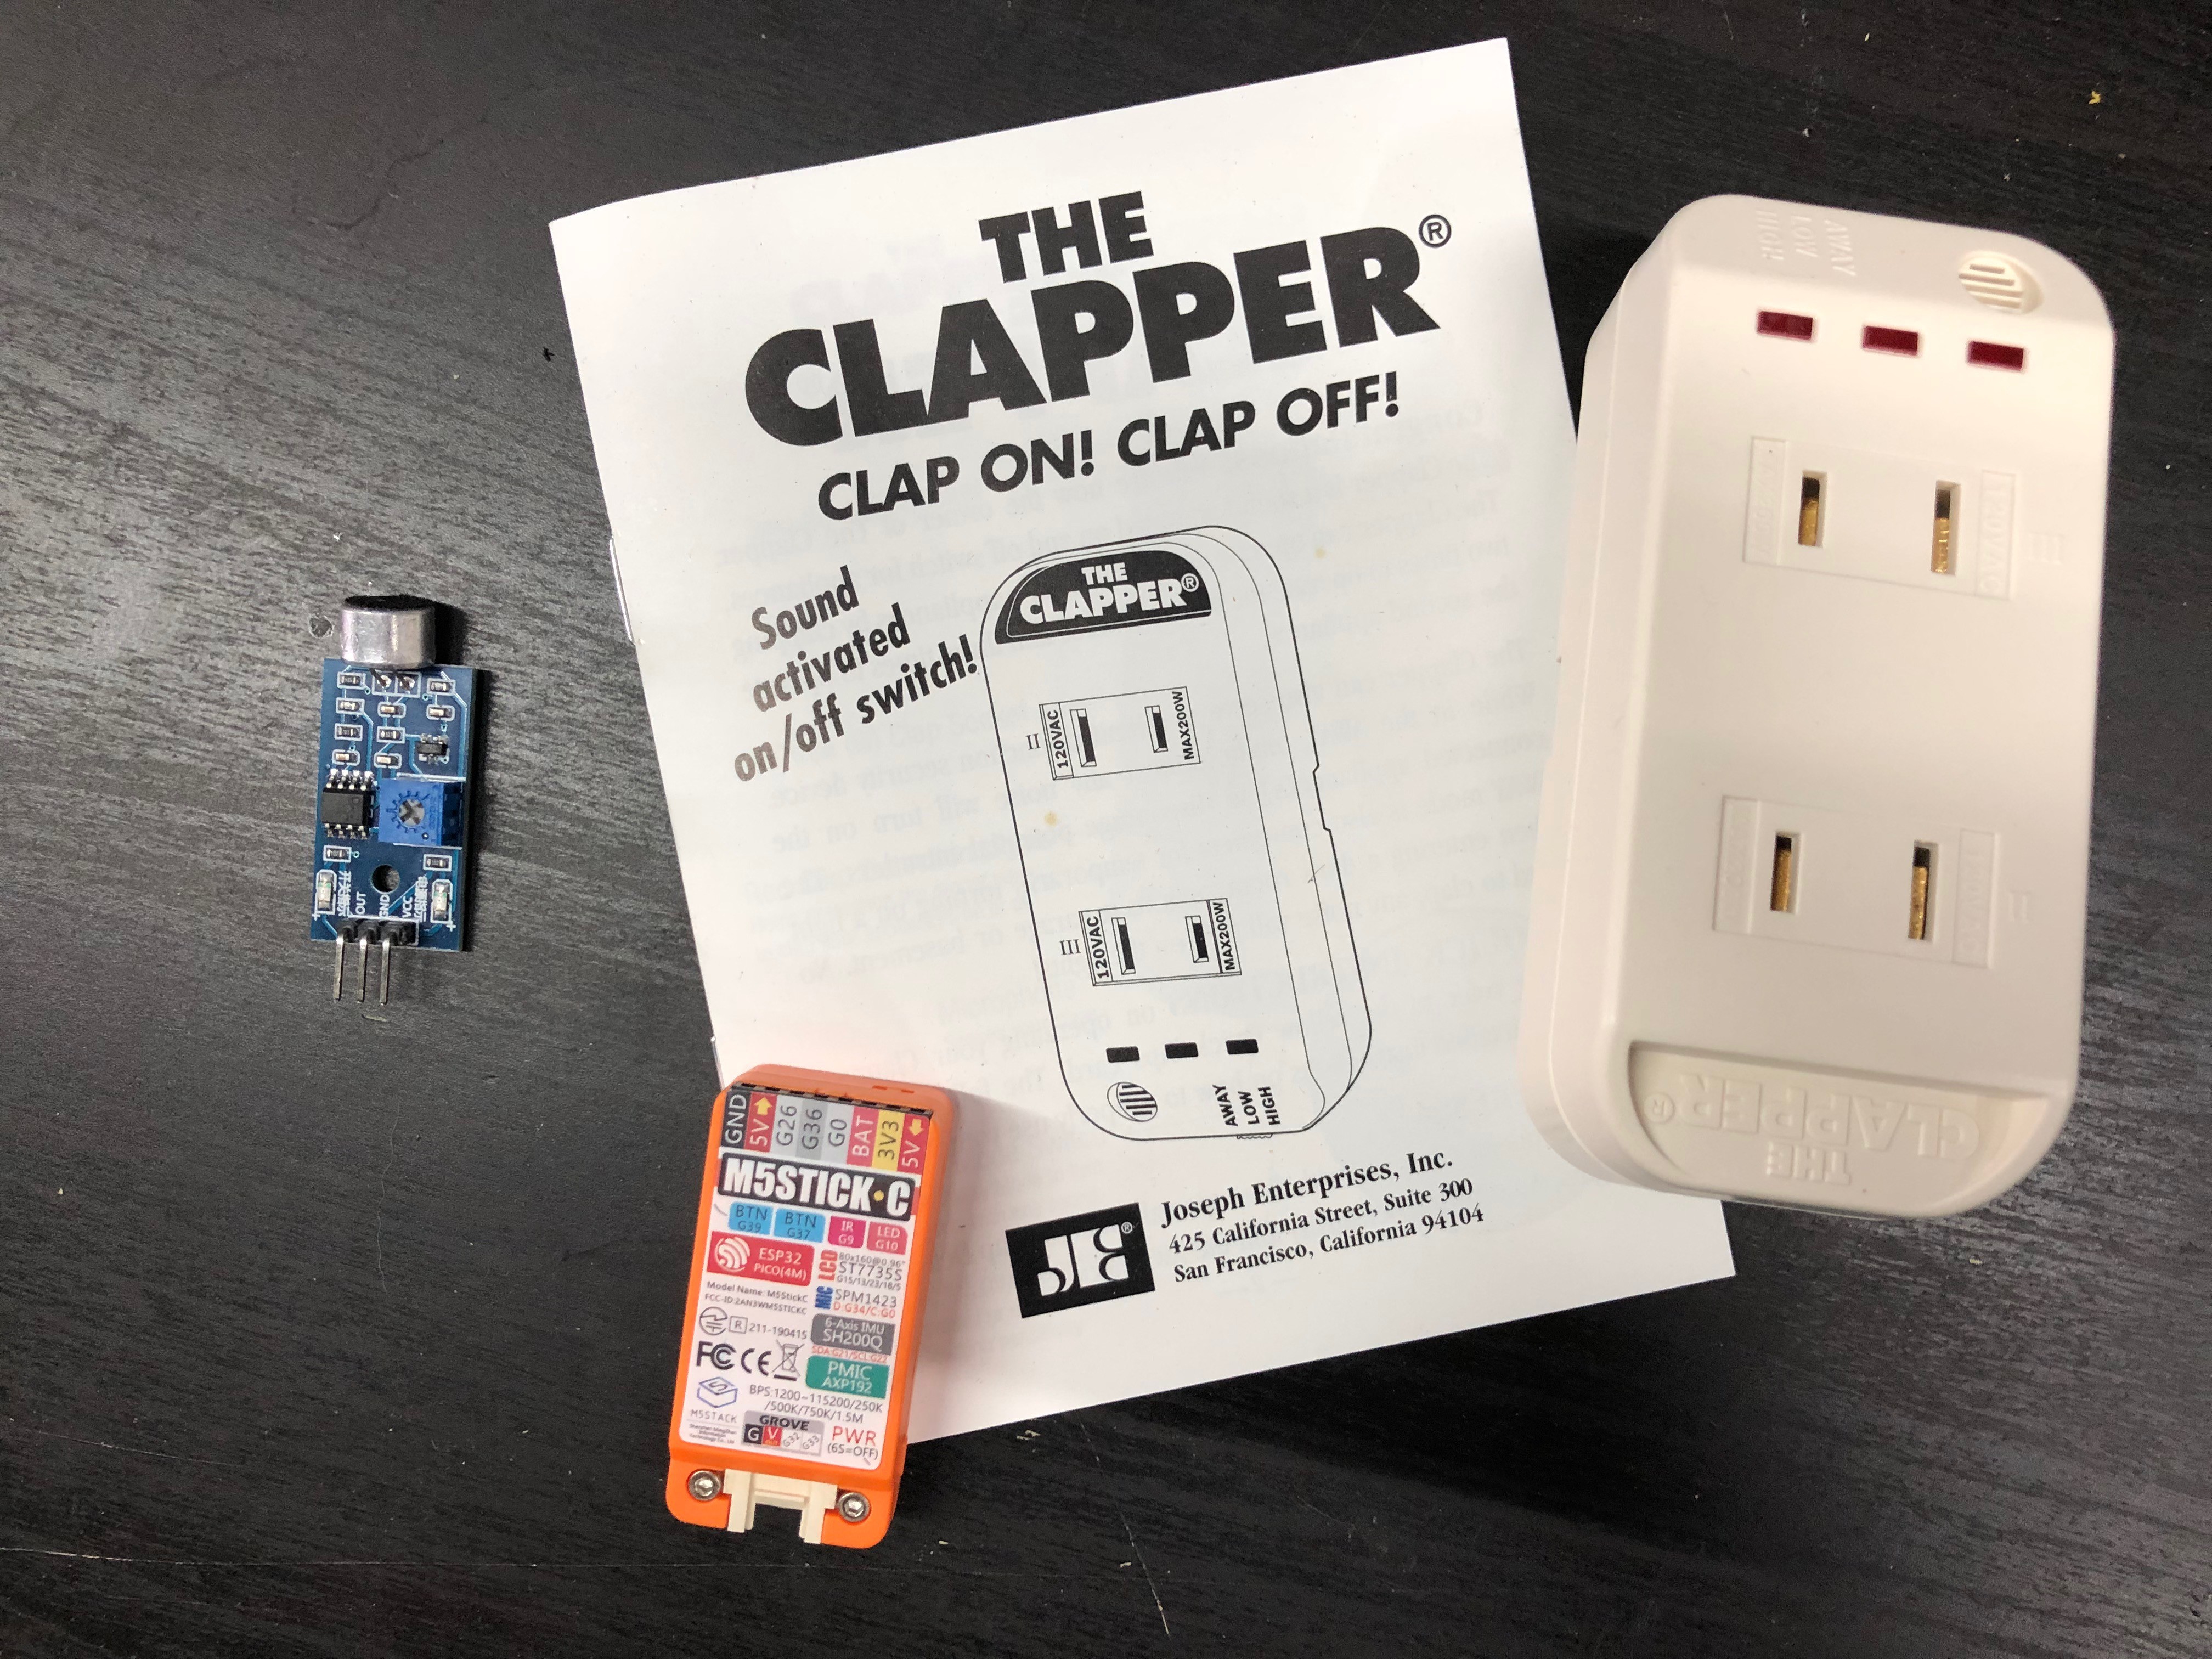 The Clapper (Original) Sound Activated on/off Switch Clap